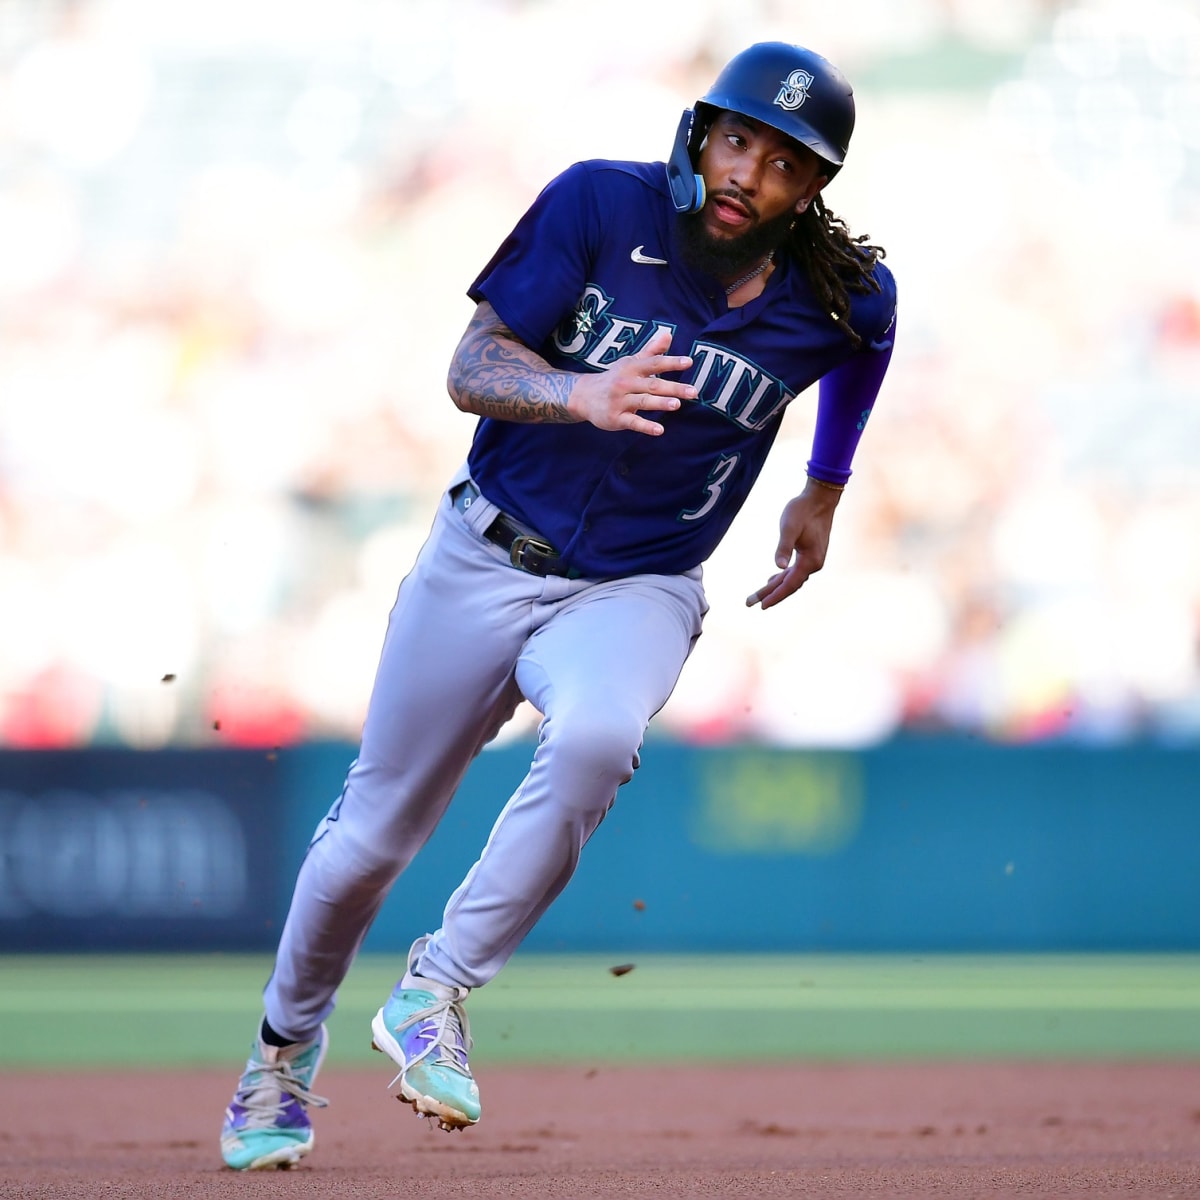 Mariners place J.P. Crawford on concussion injured list